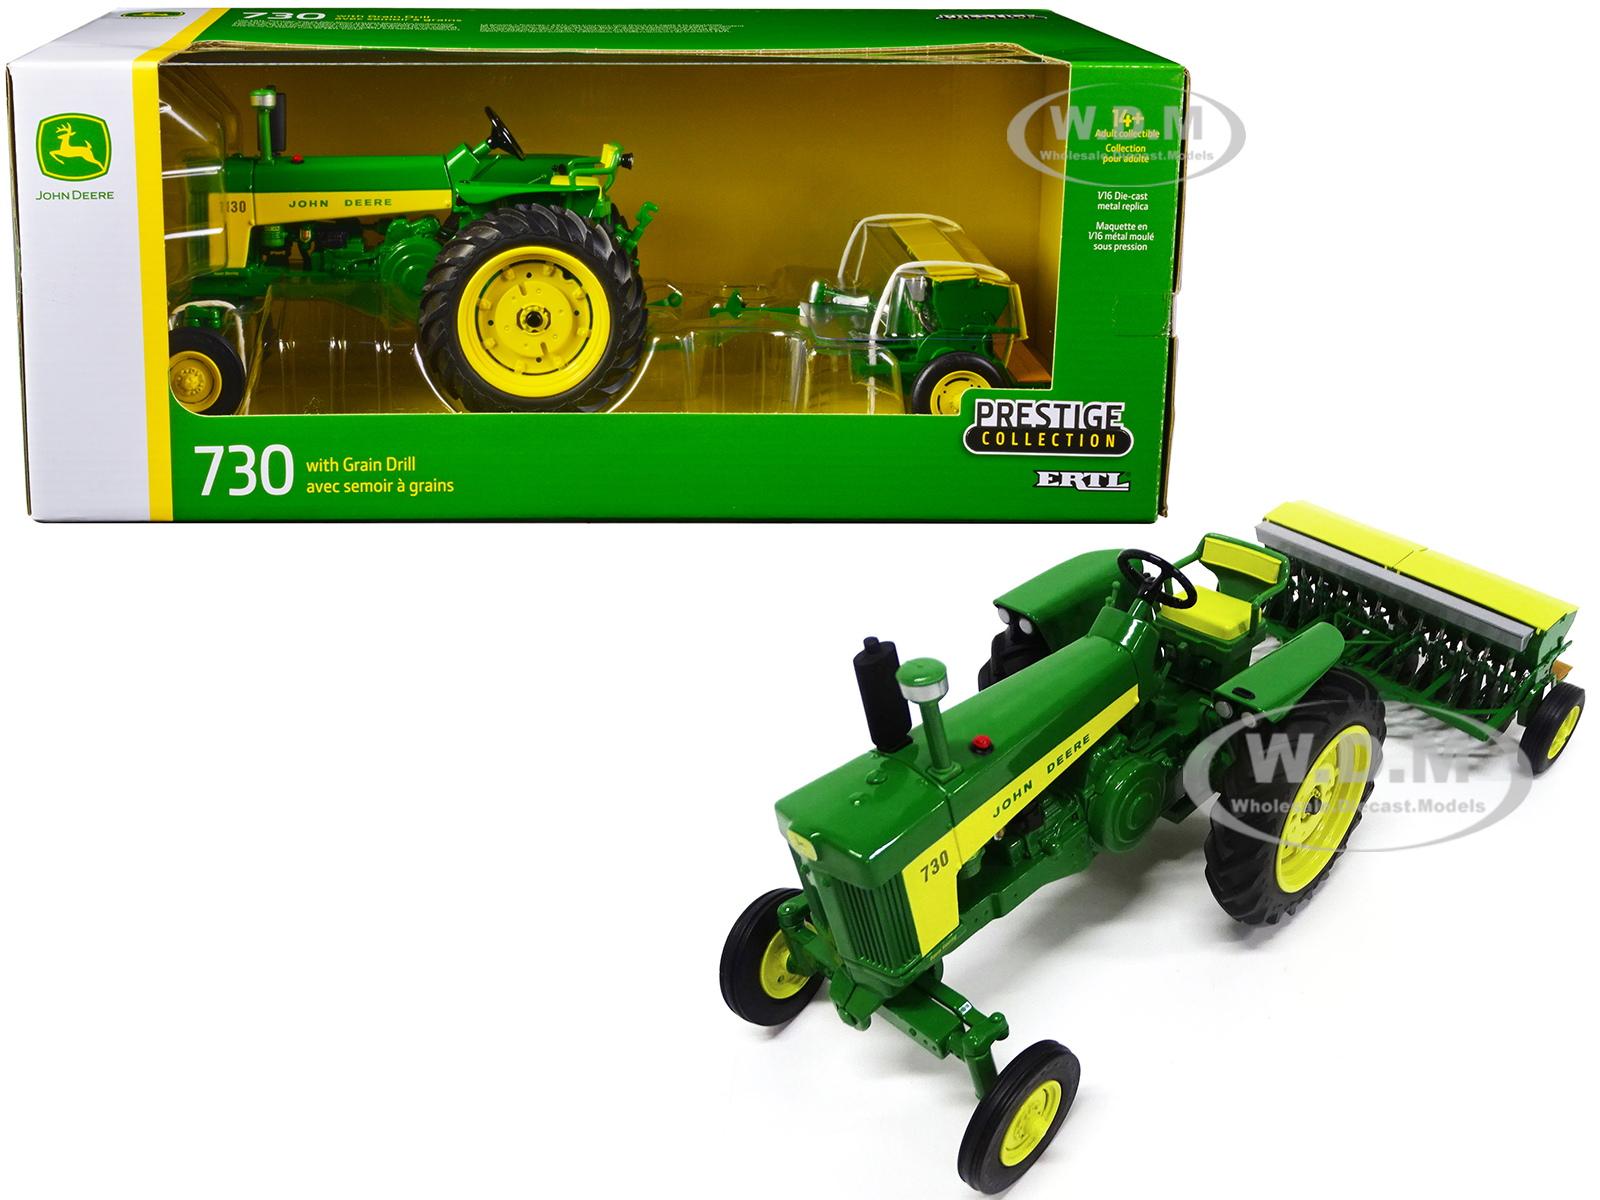 John Deere 730 Tractor Green with Grain Drill "Prestige Collection" 1/16 Diecast Model by ERTL TOMY